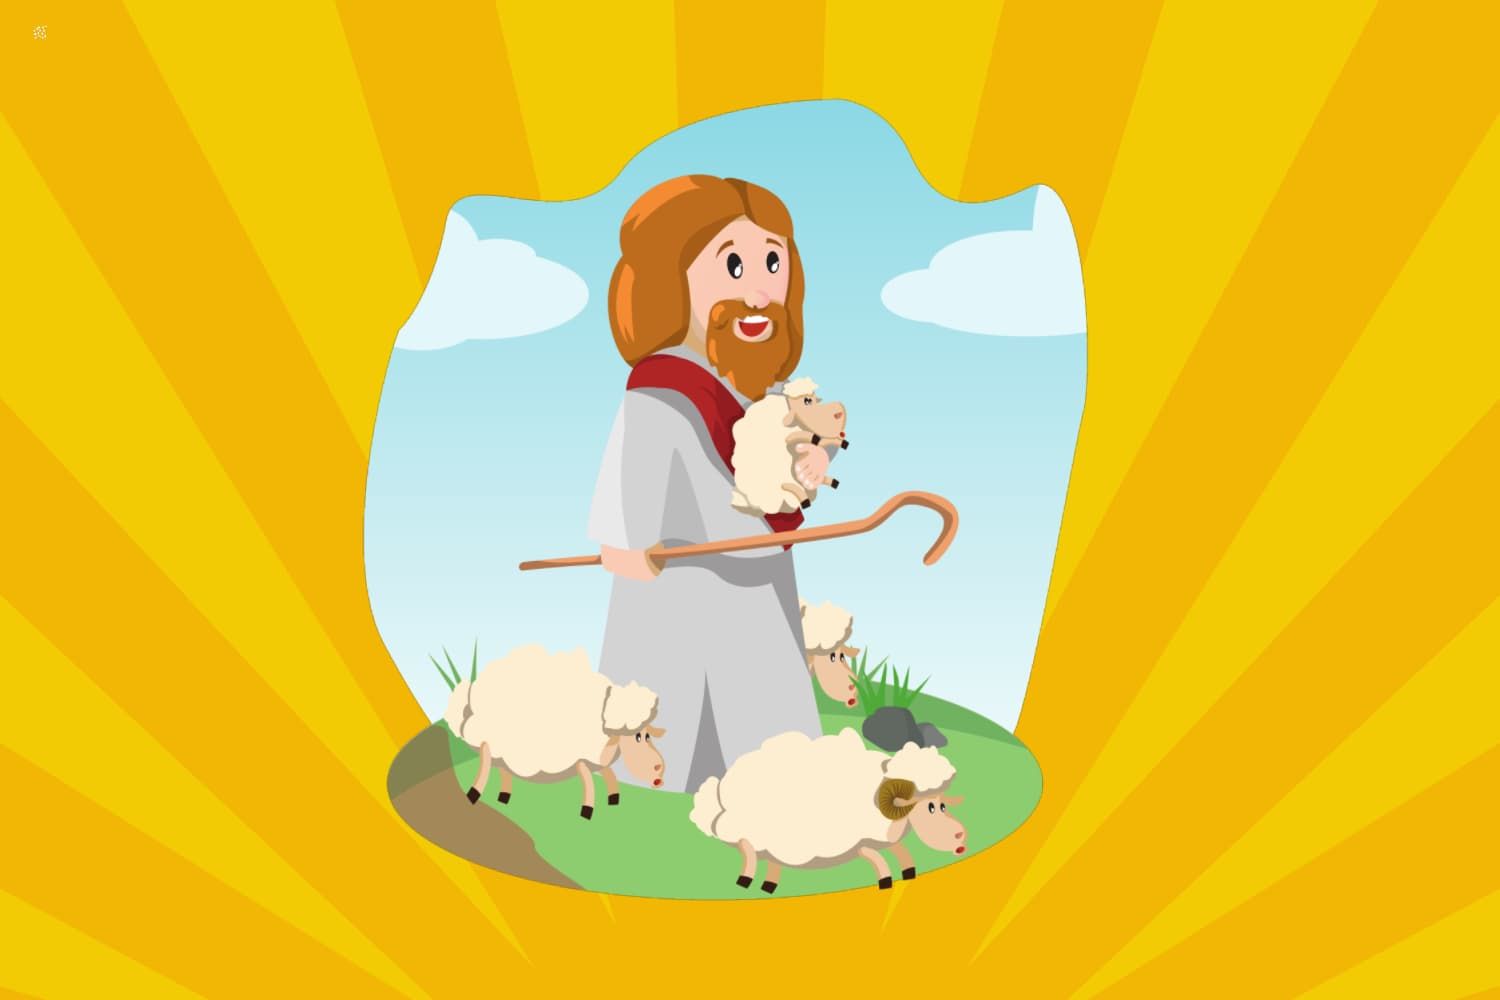 Childrens%20moment%20-%20NT%20Teaching%20on%20the%20good%20shepherd%20-%20Recognizing%20the%20shepherds%20voice%202-62442aa4 Jesus - His parables